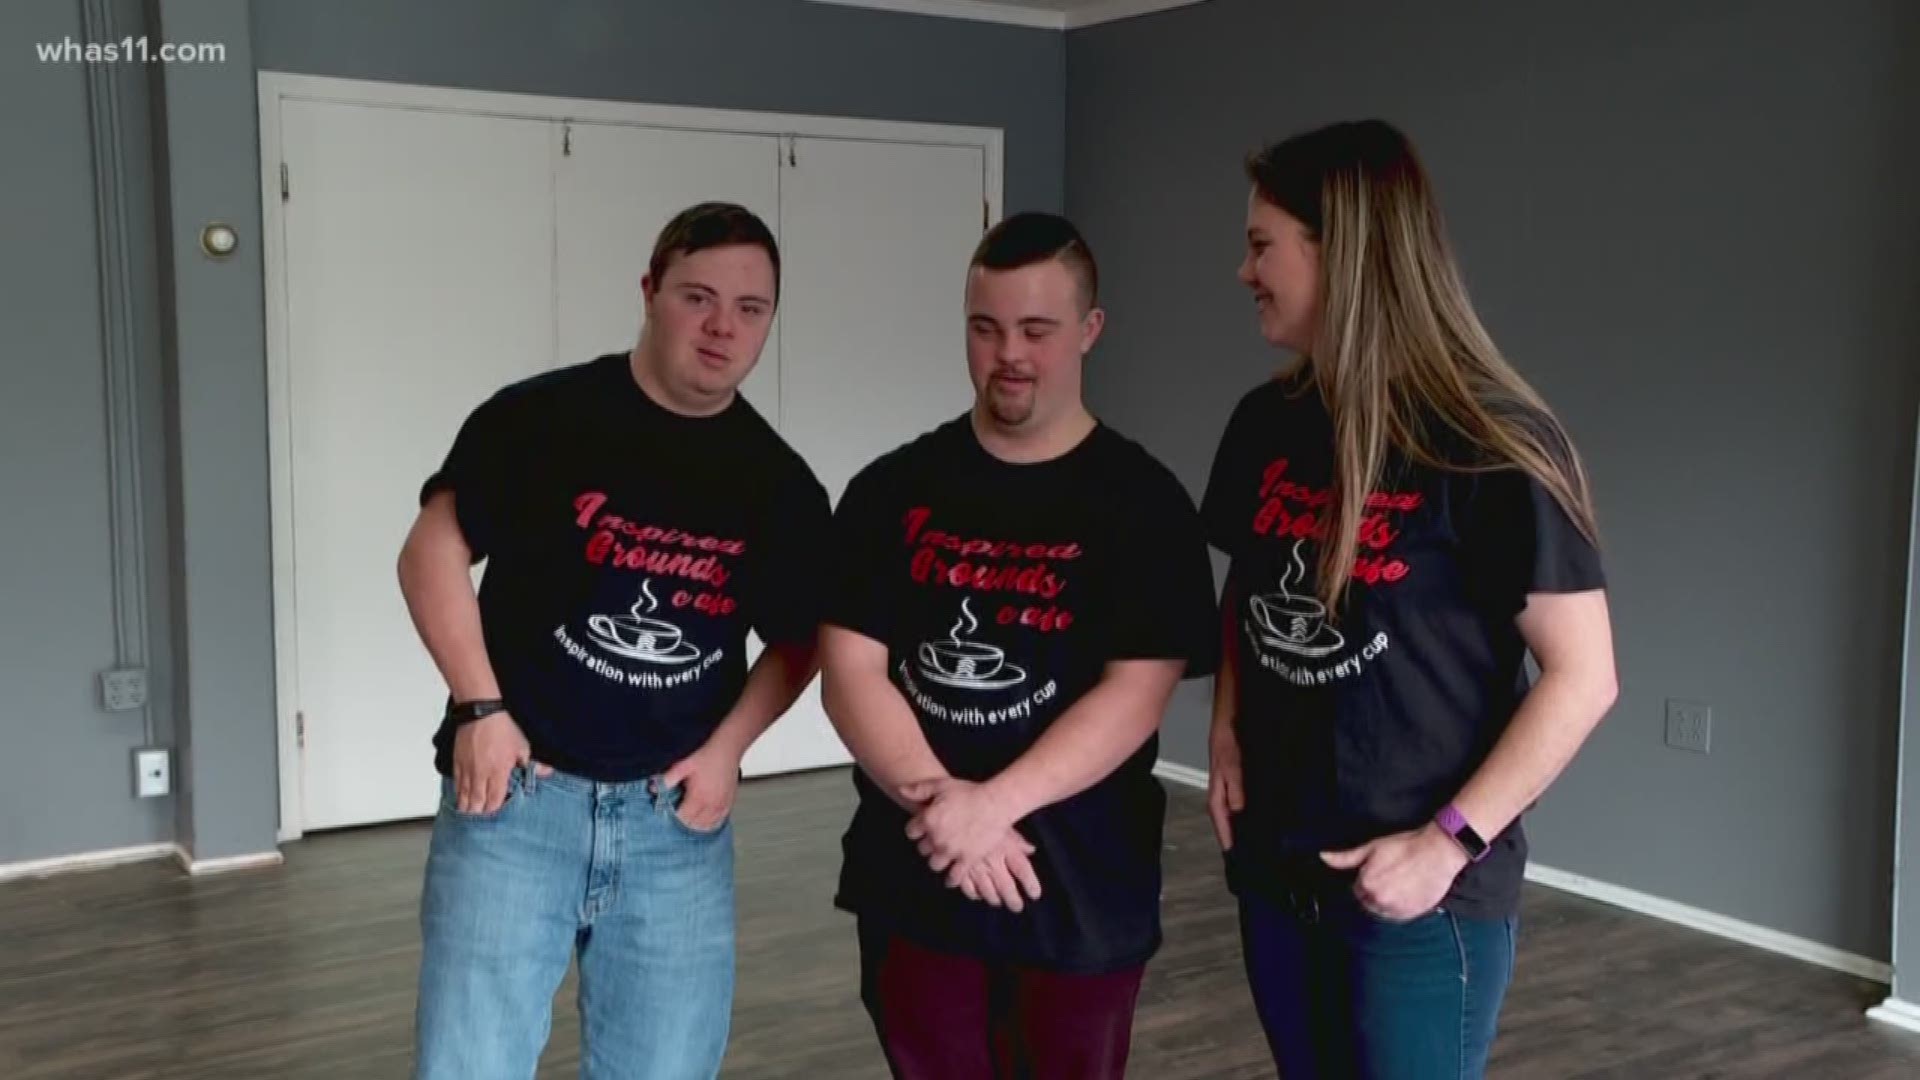 Coffee is a necessity for most of us, but what if your daily dose could make a difference? That's the idea behind a new shop in southern Indiana. It will hire people with special needs, and it's a personal cause for the pair of moms who own it.